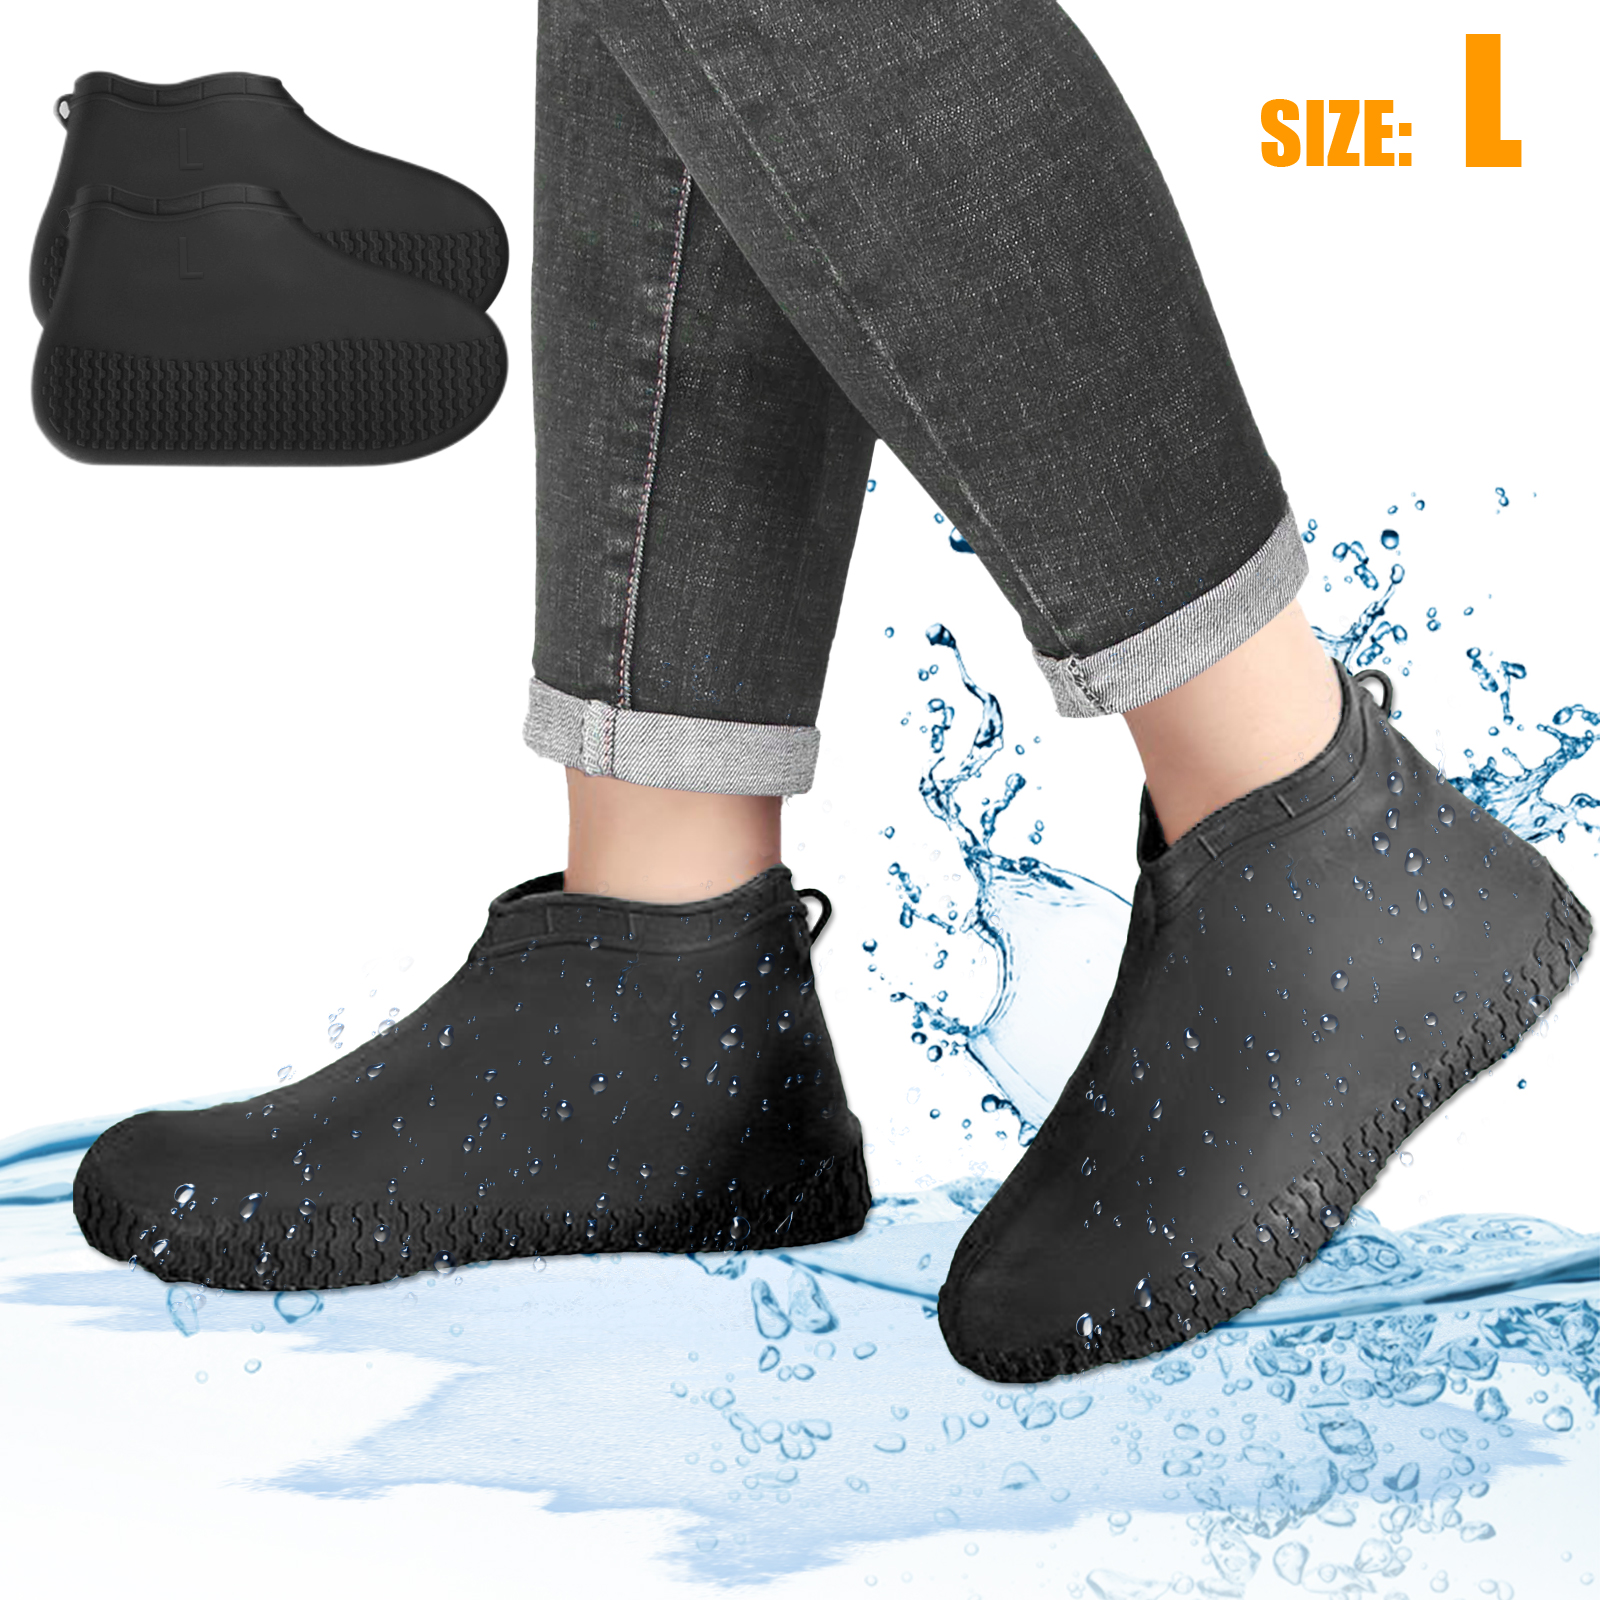 Overshoes Rain Silicone Waterproof Shoe Covers Boot Cover Protector Recyclable 1 